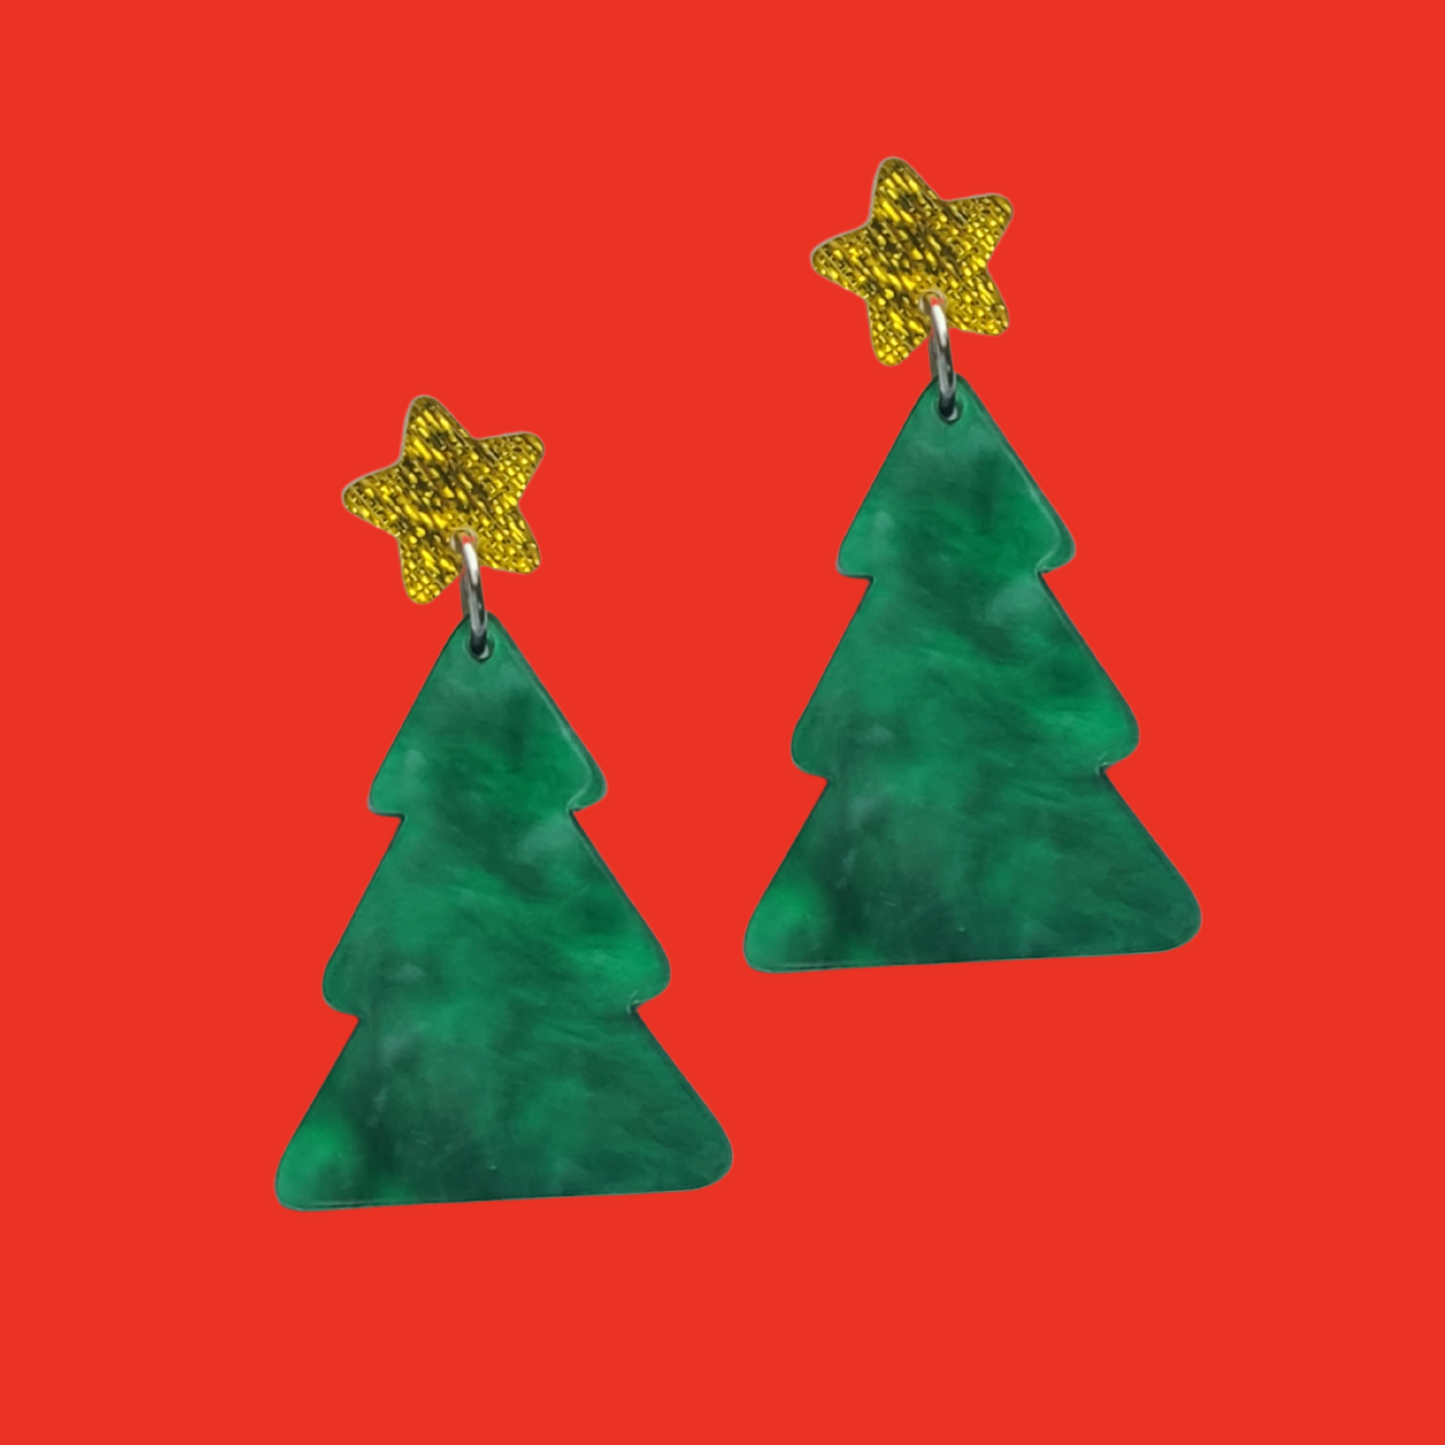 Christmas Trees - Earrings on Pearlized Green Acrylic with Gold Star Stud - Christmas